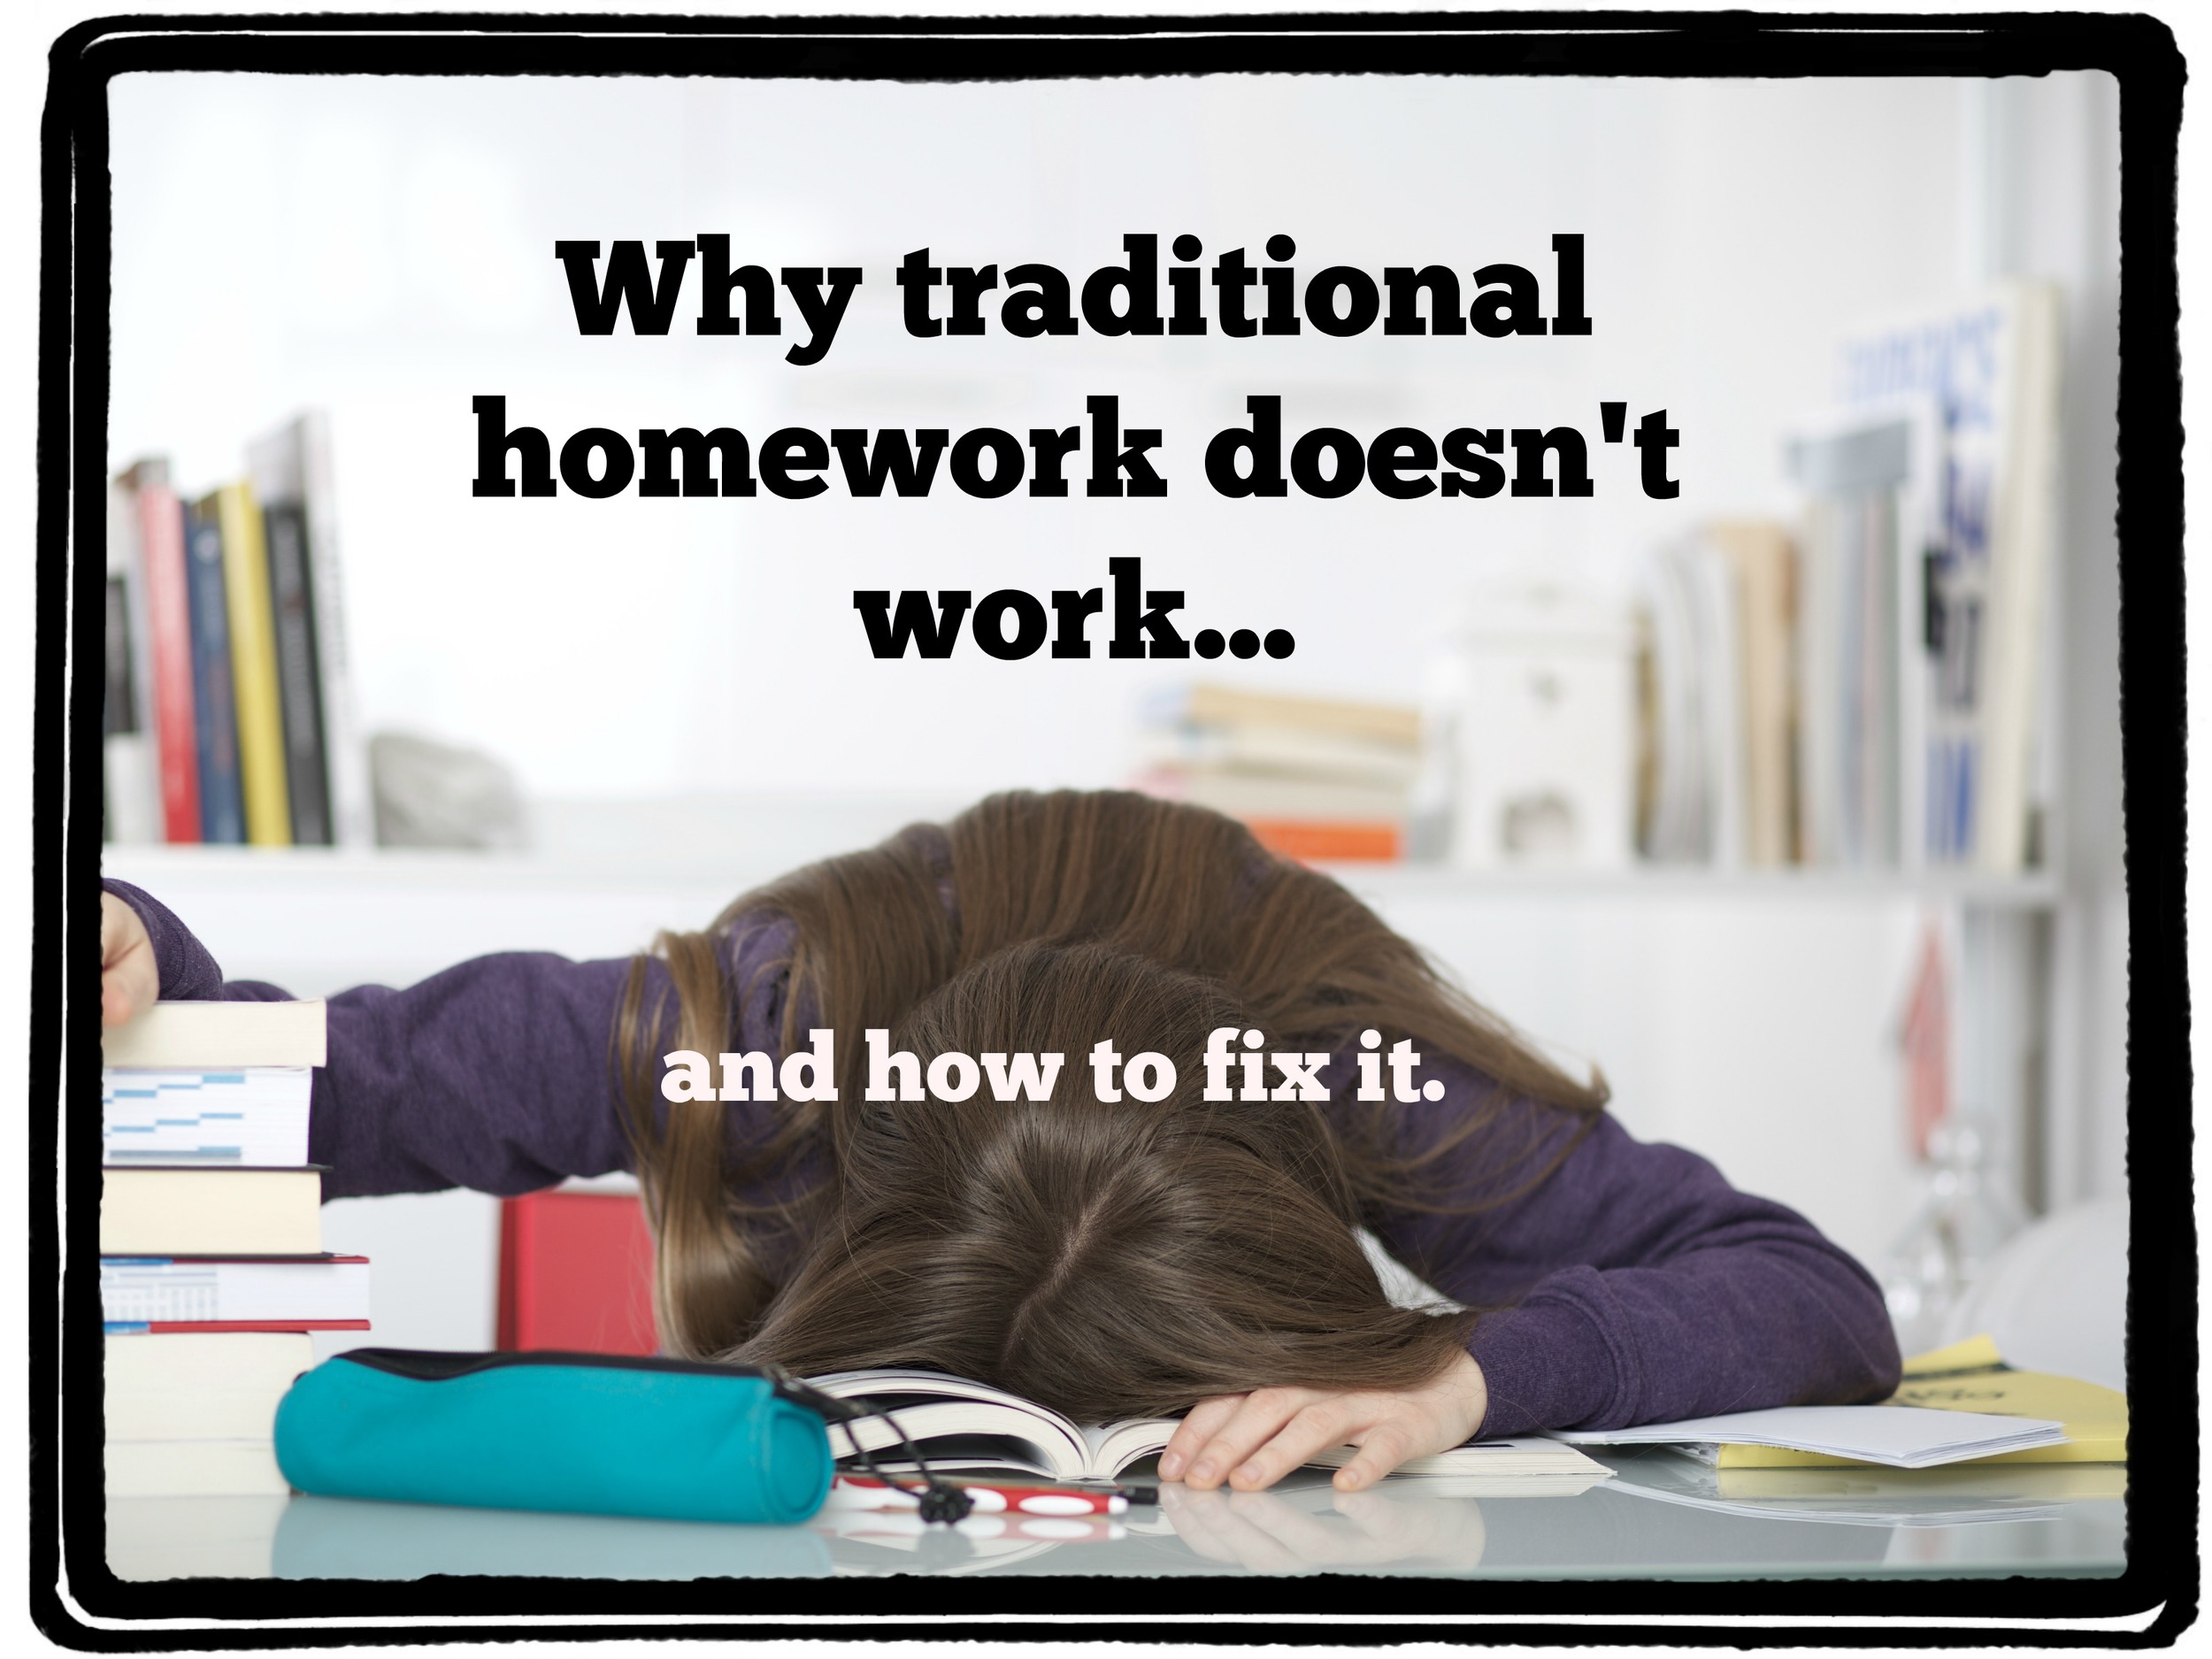 research shows homework doesn't help